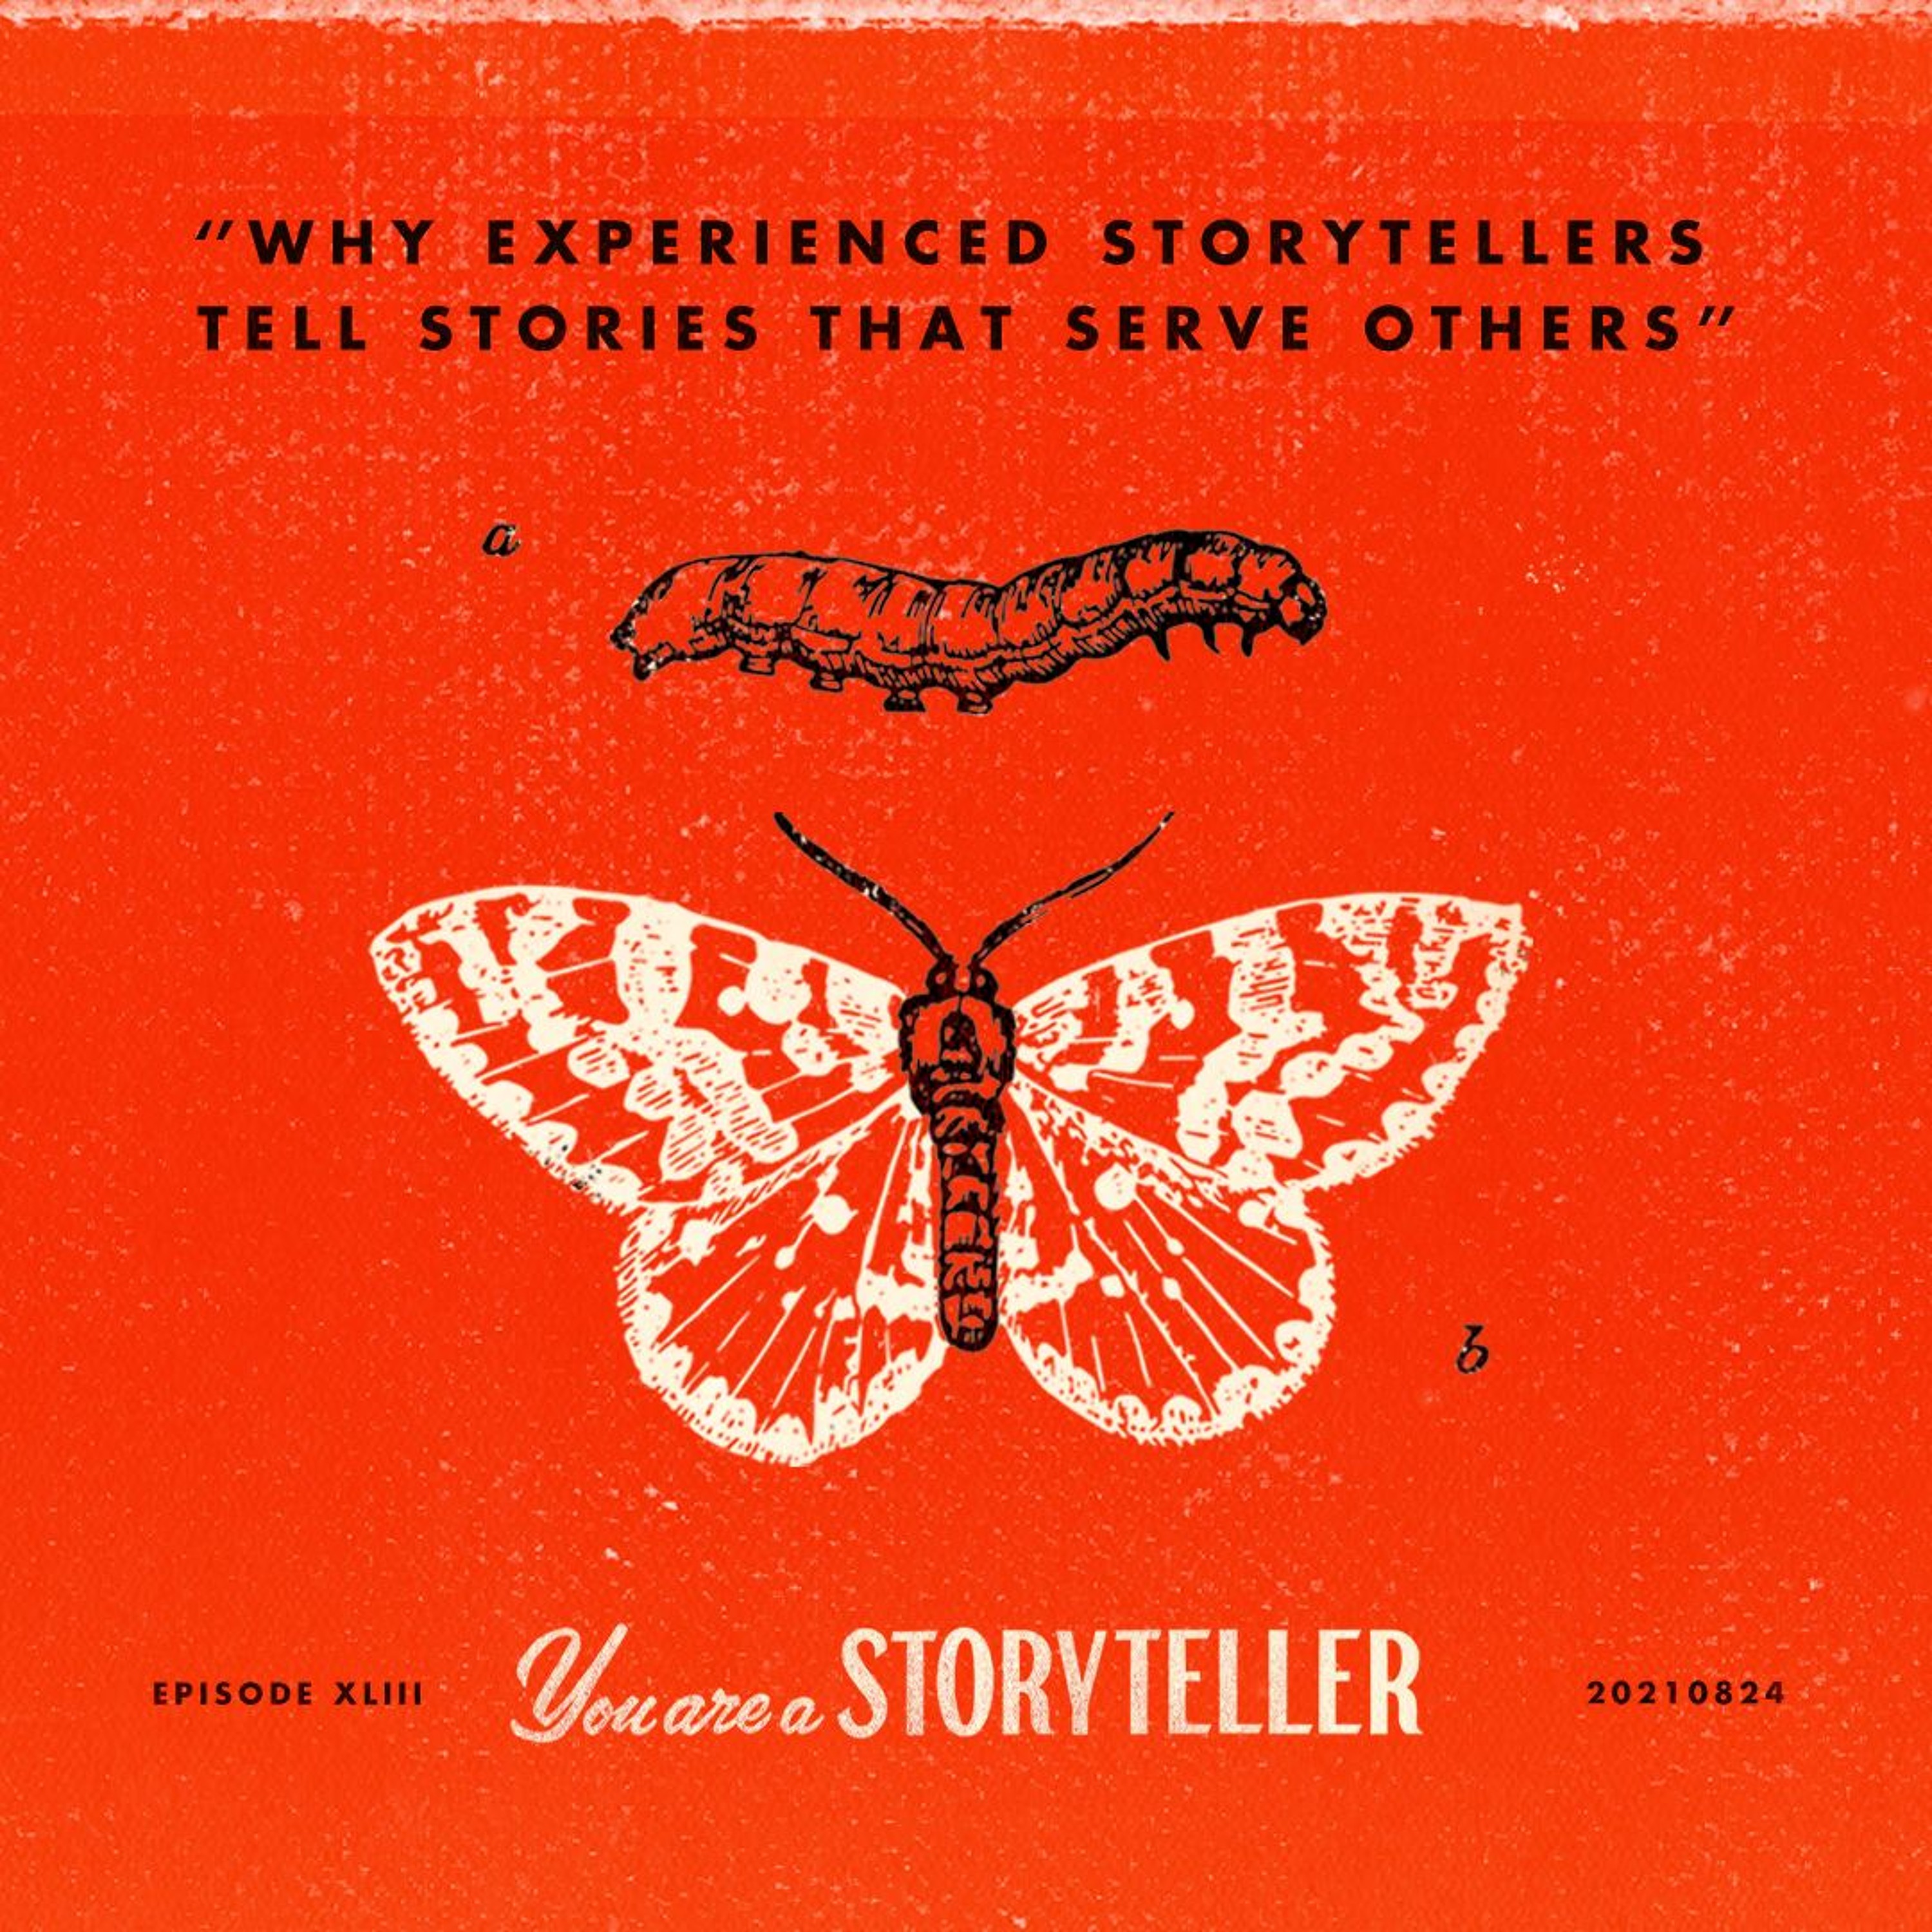 Why Experienced Storytellers Tell Stories That Serve Others